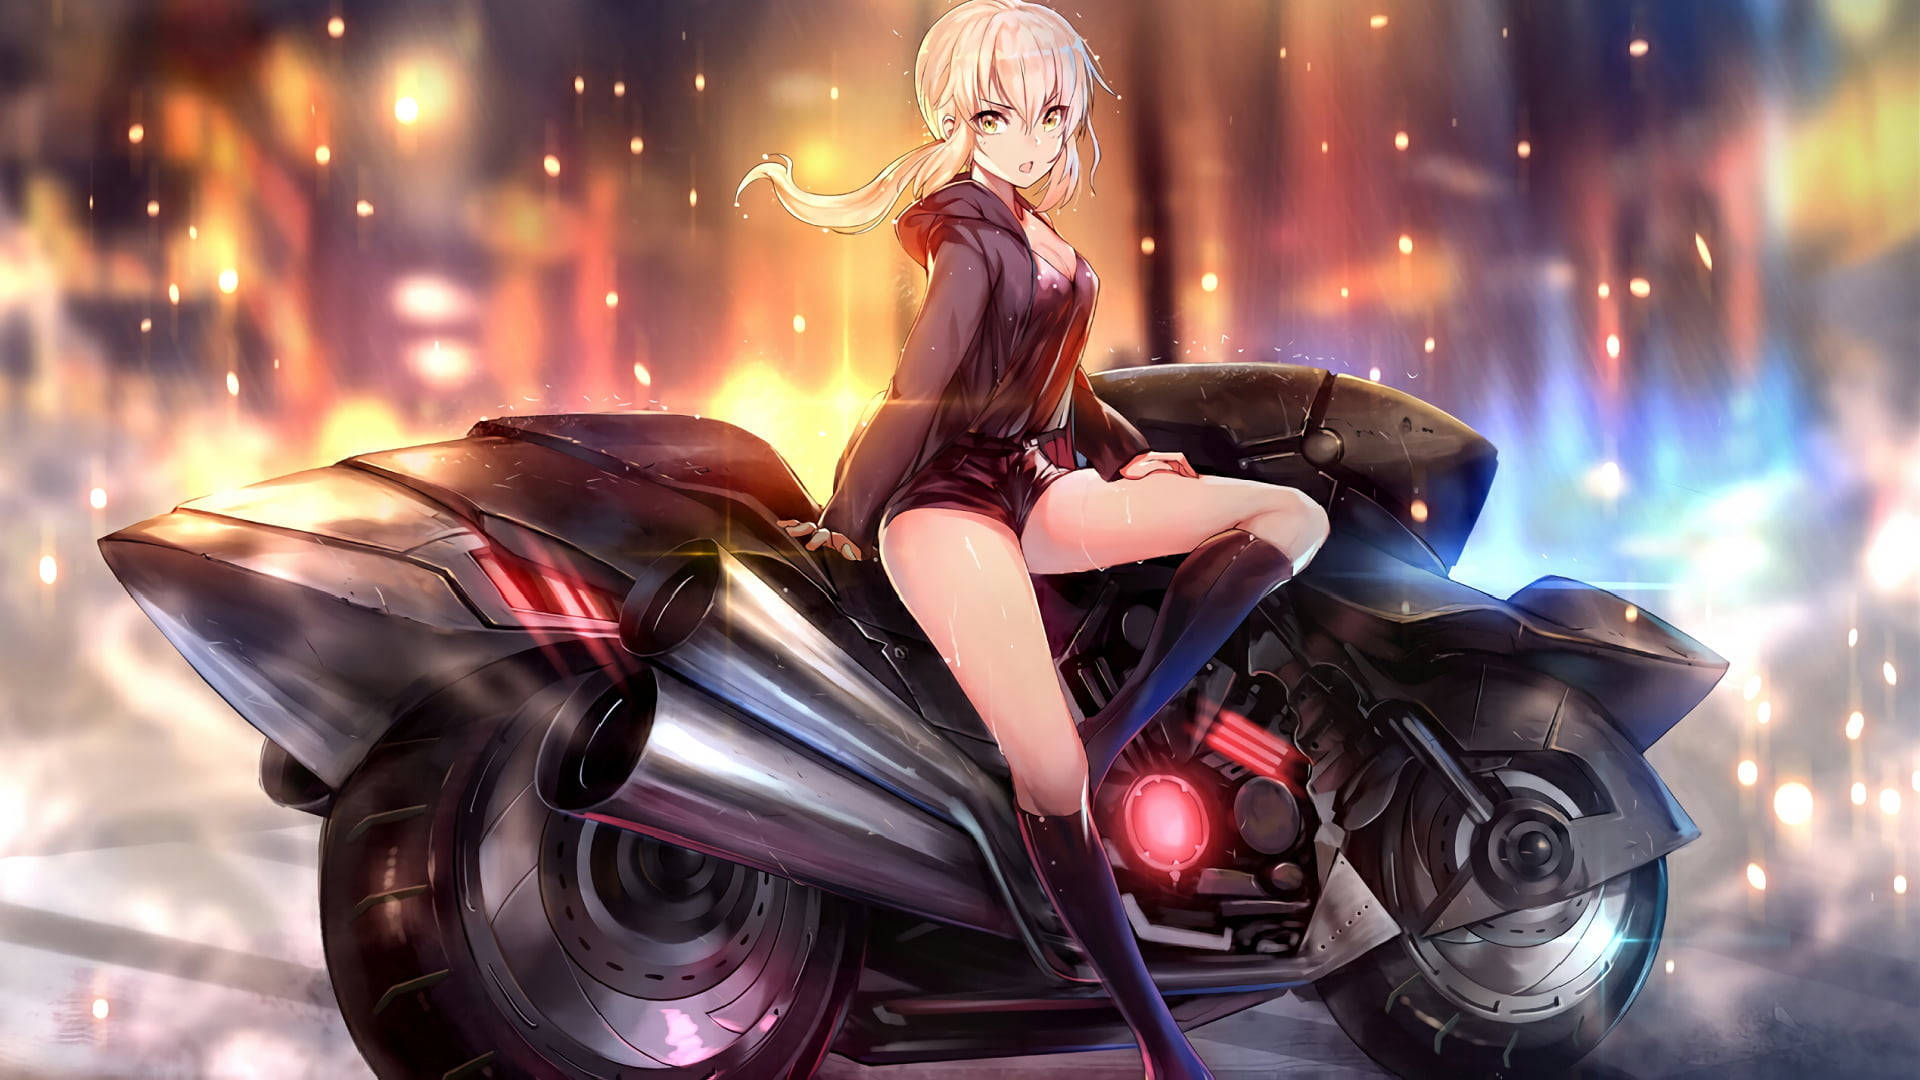 Mujeres Calientes Anime In Motorcycle Wallpaper